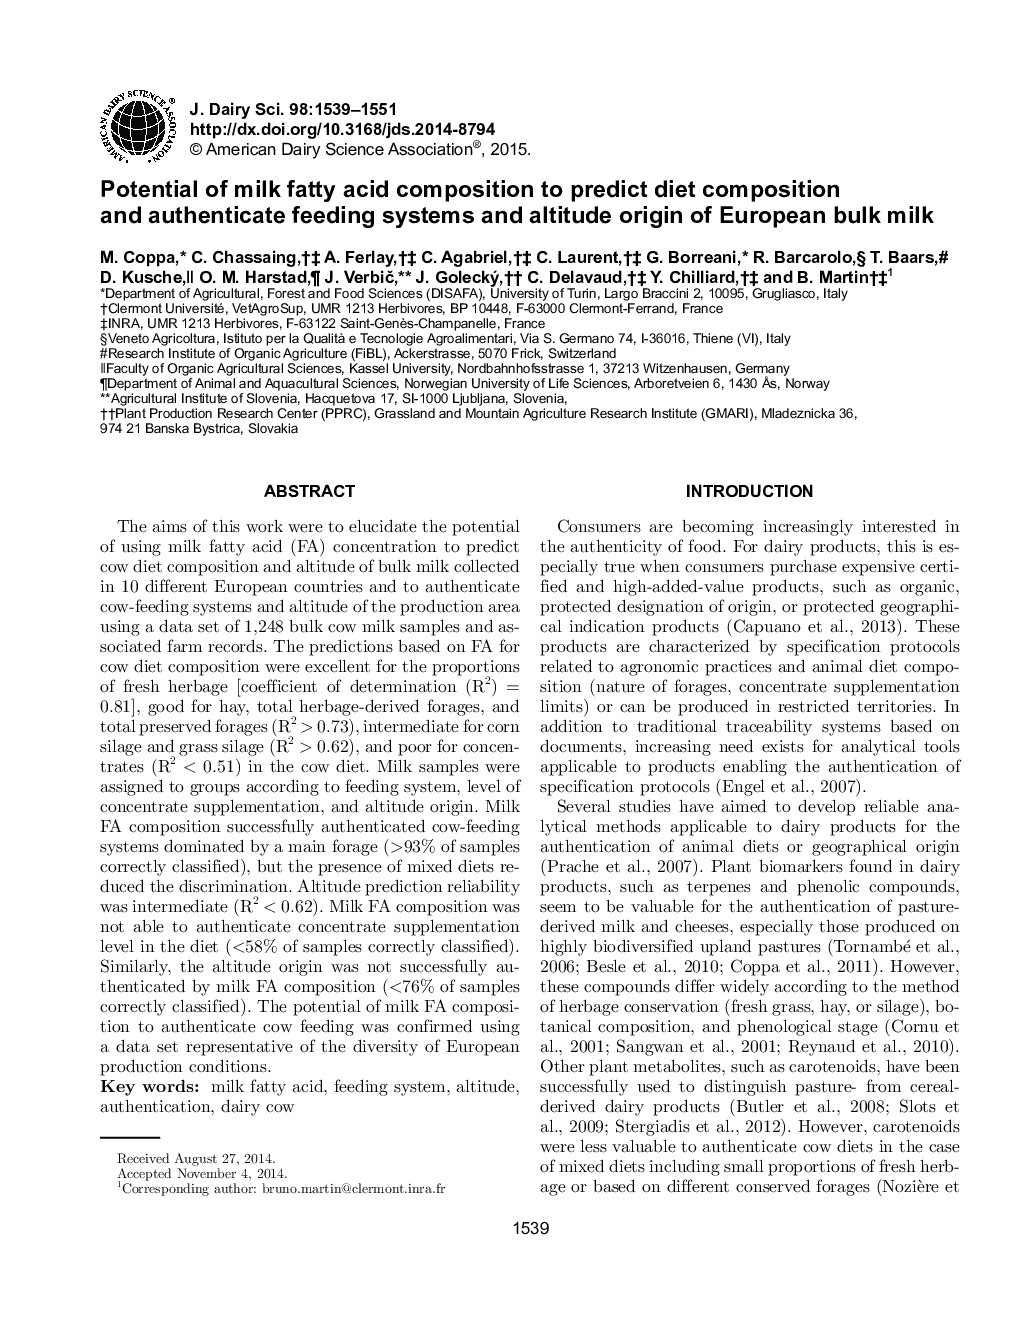 Potential of milk fatty acid composition to predict diet composition and authenticate feeding systems and altitude origin of European bulk milk